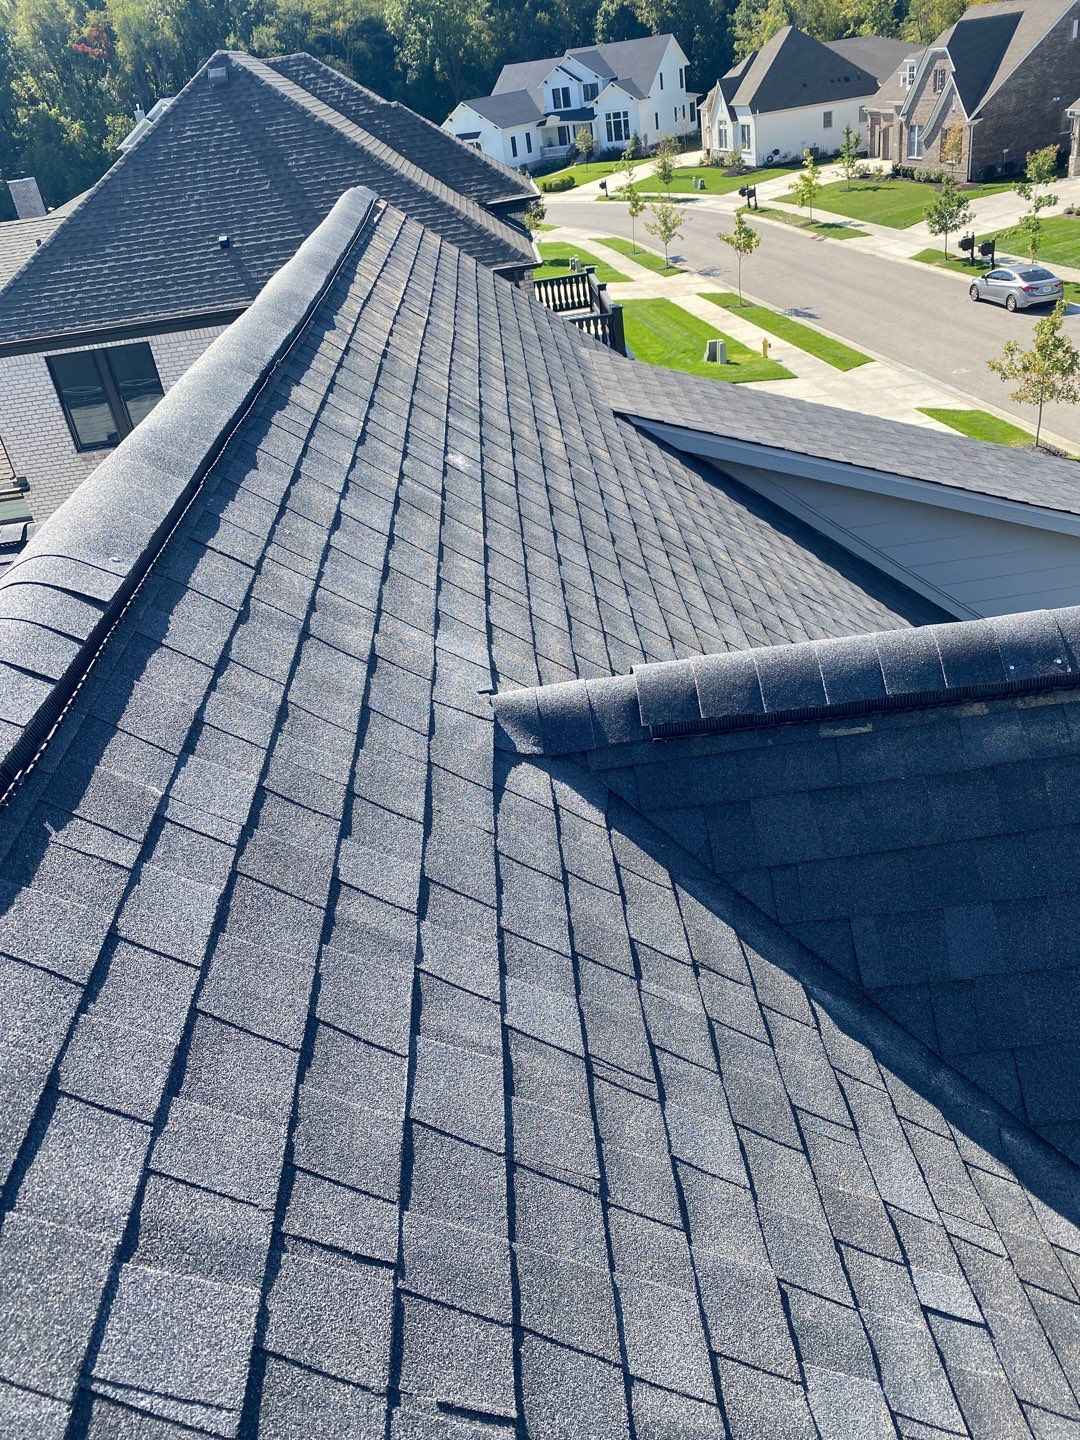 Carmel, IN residential and commercial roofing services